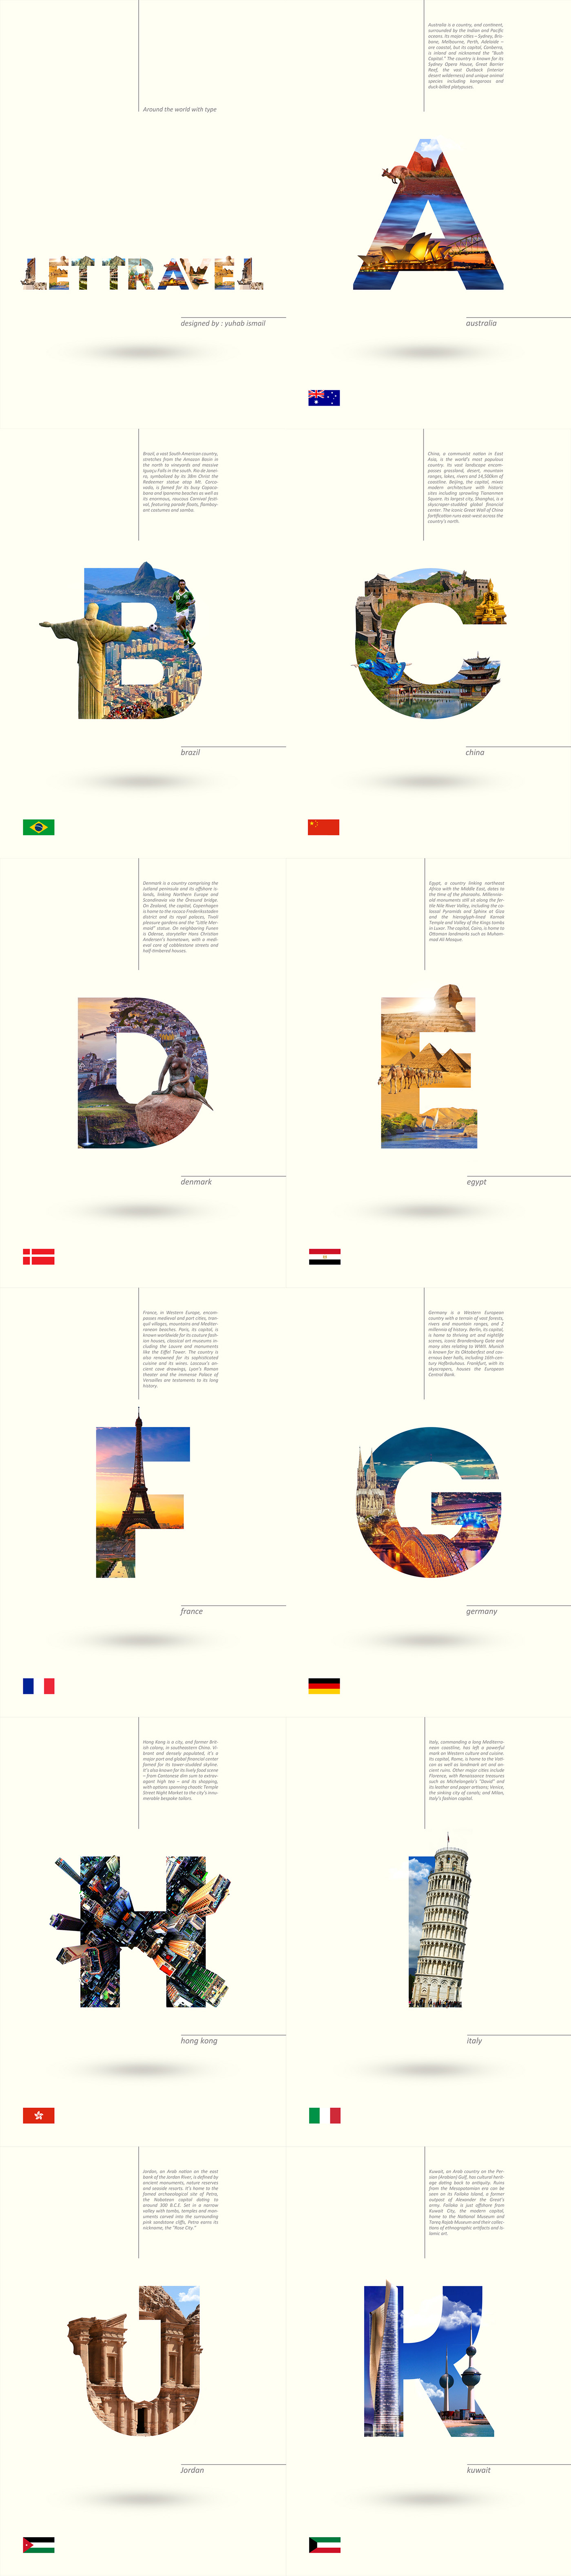 typo poster inspiration world A2Z country tourism tour countryside